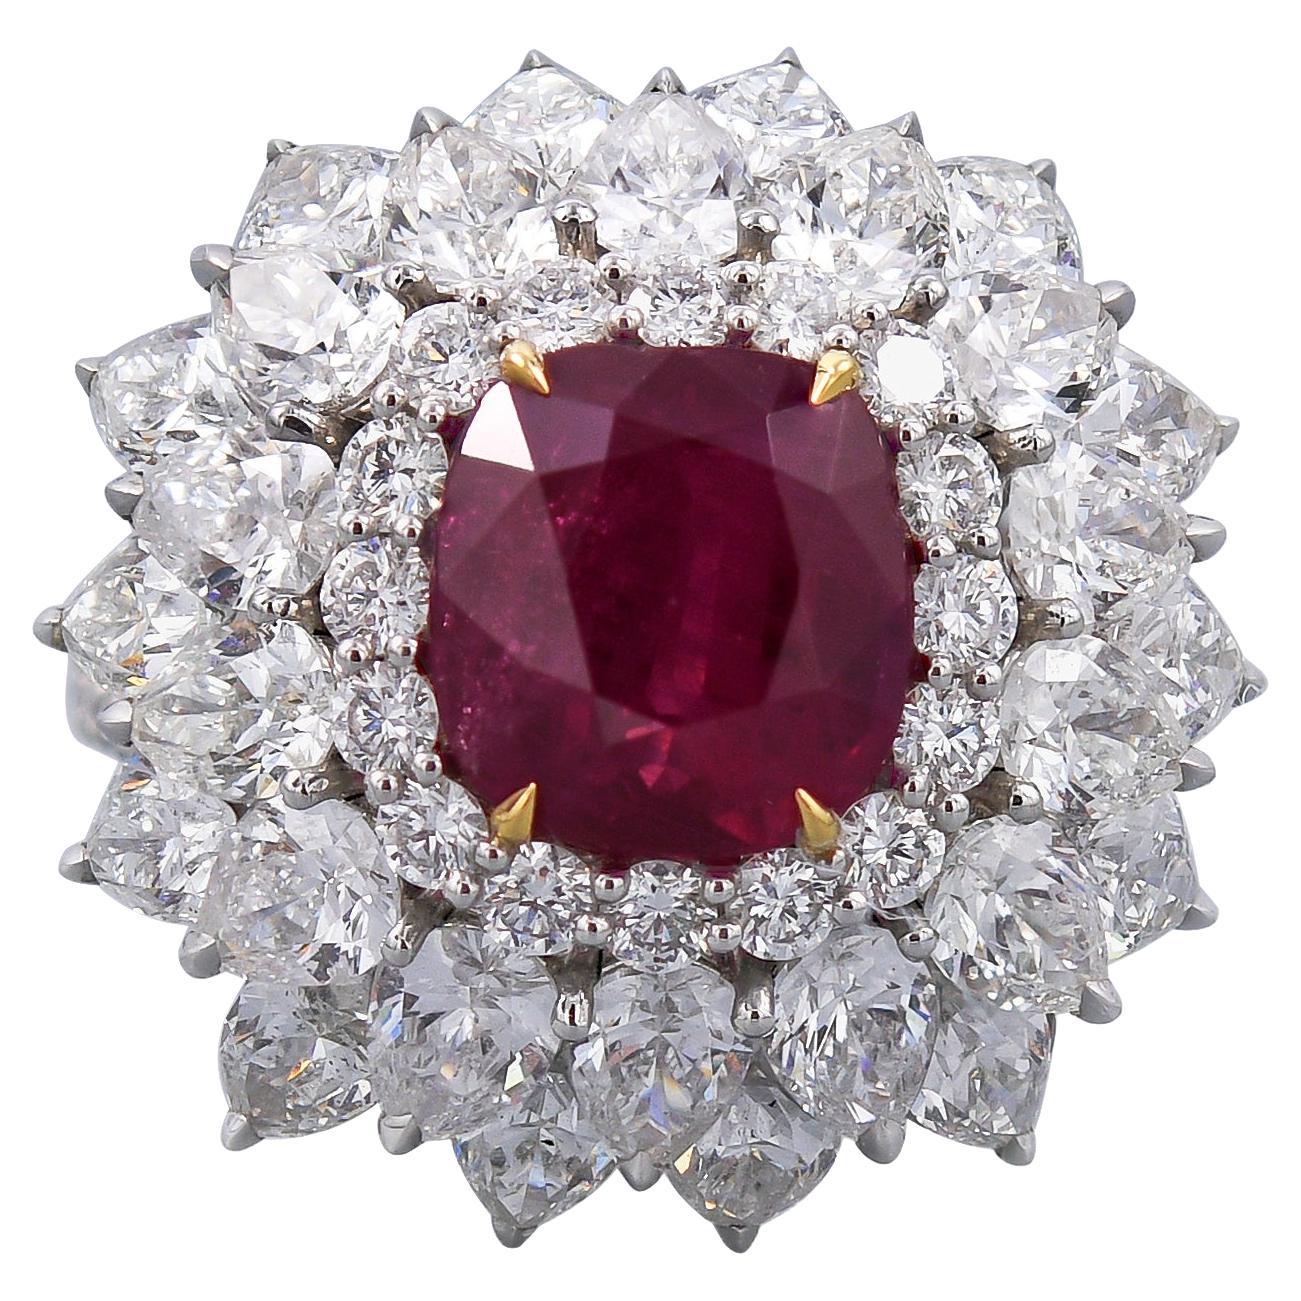 Spectra Fine Jewelry Certified 5.02 Carat Ruby Diamond Cocktail Ring For Sale